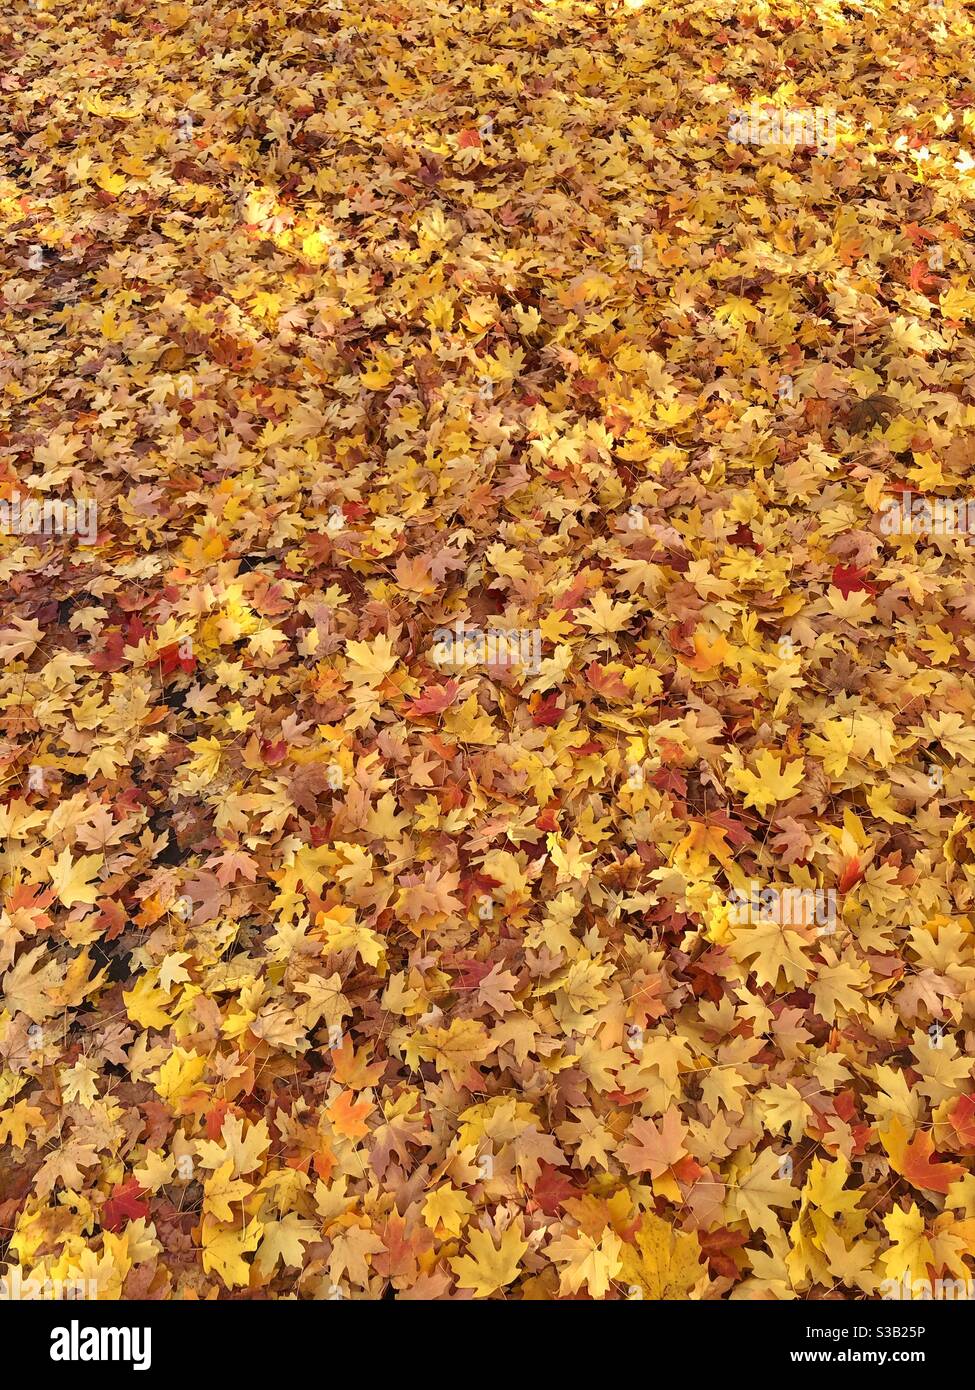 Fall leaves covering the ground. Stock Photo